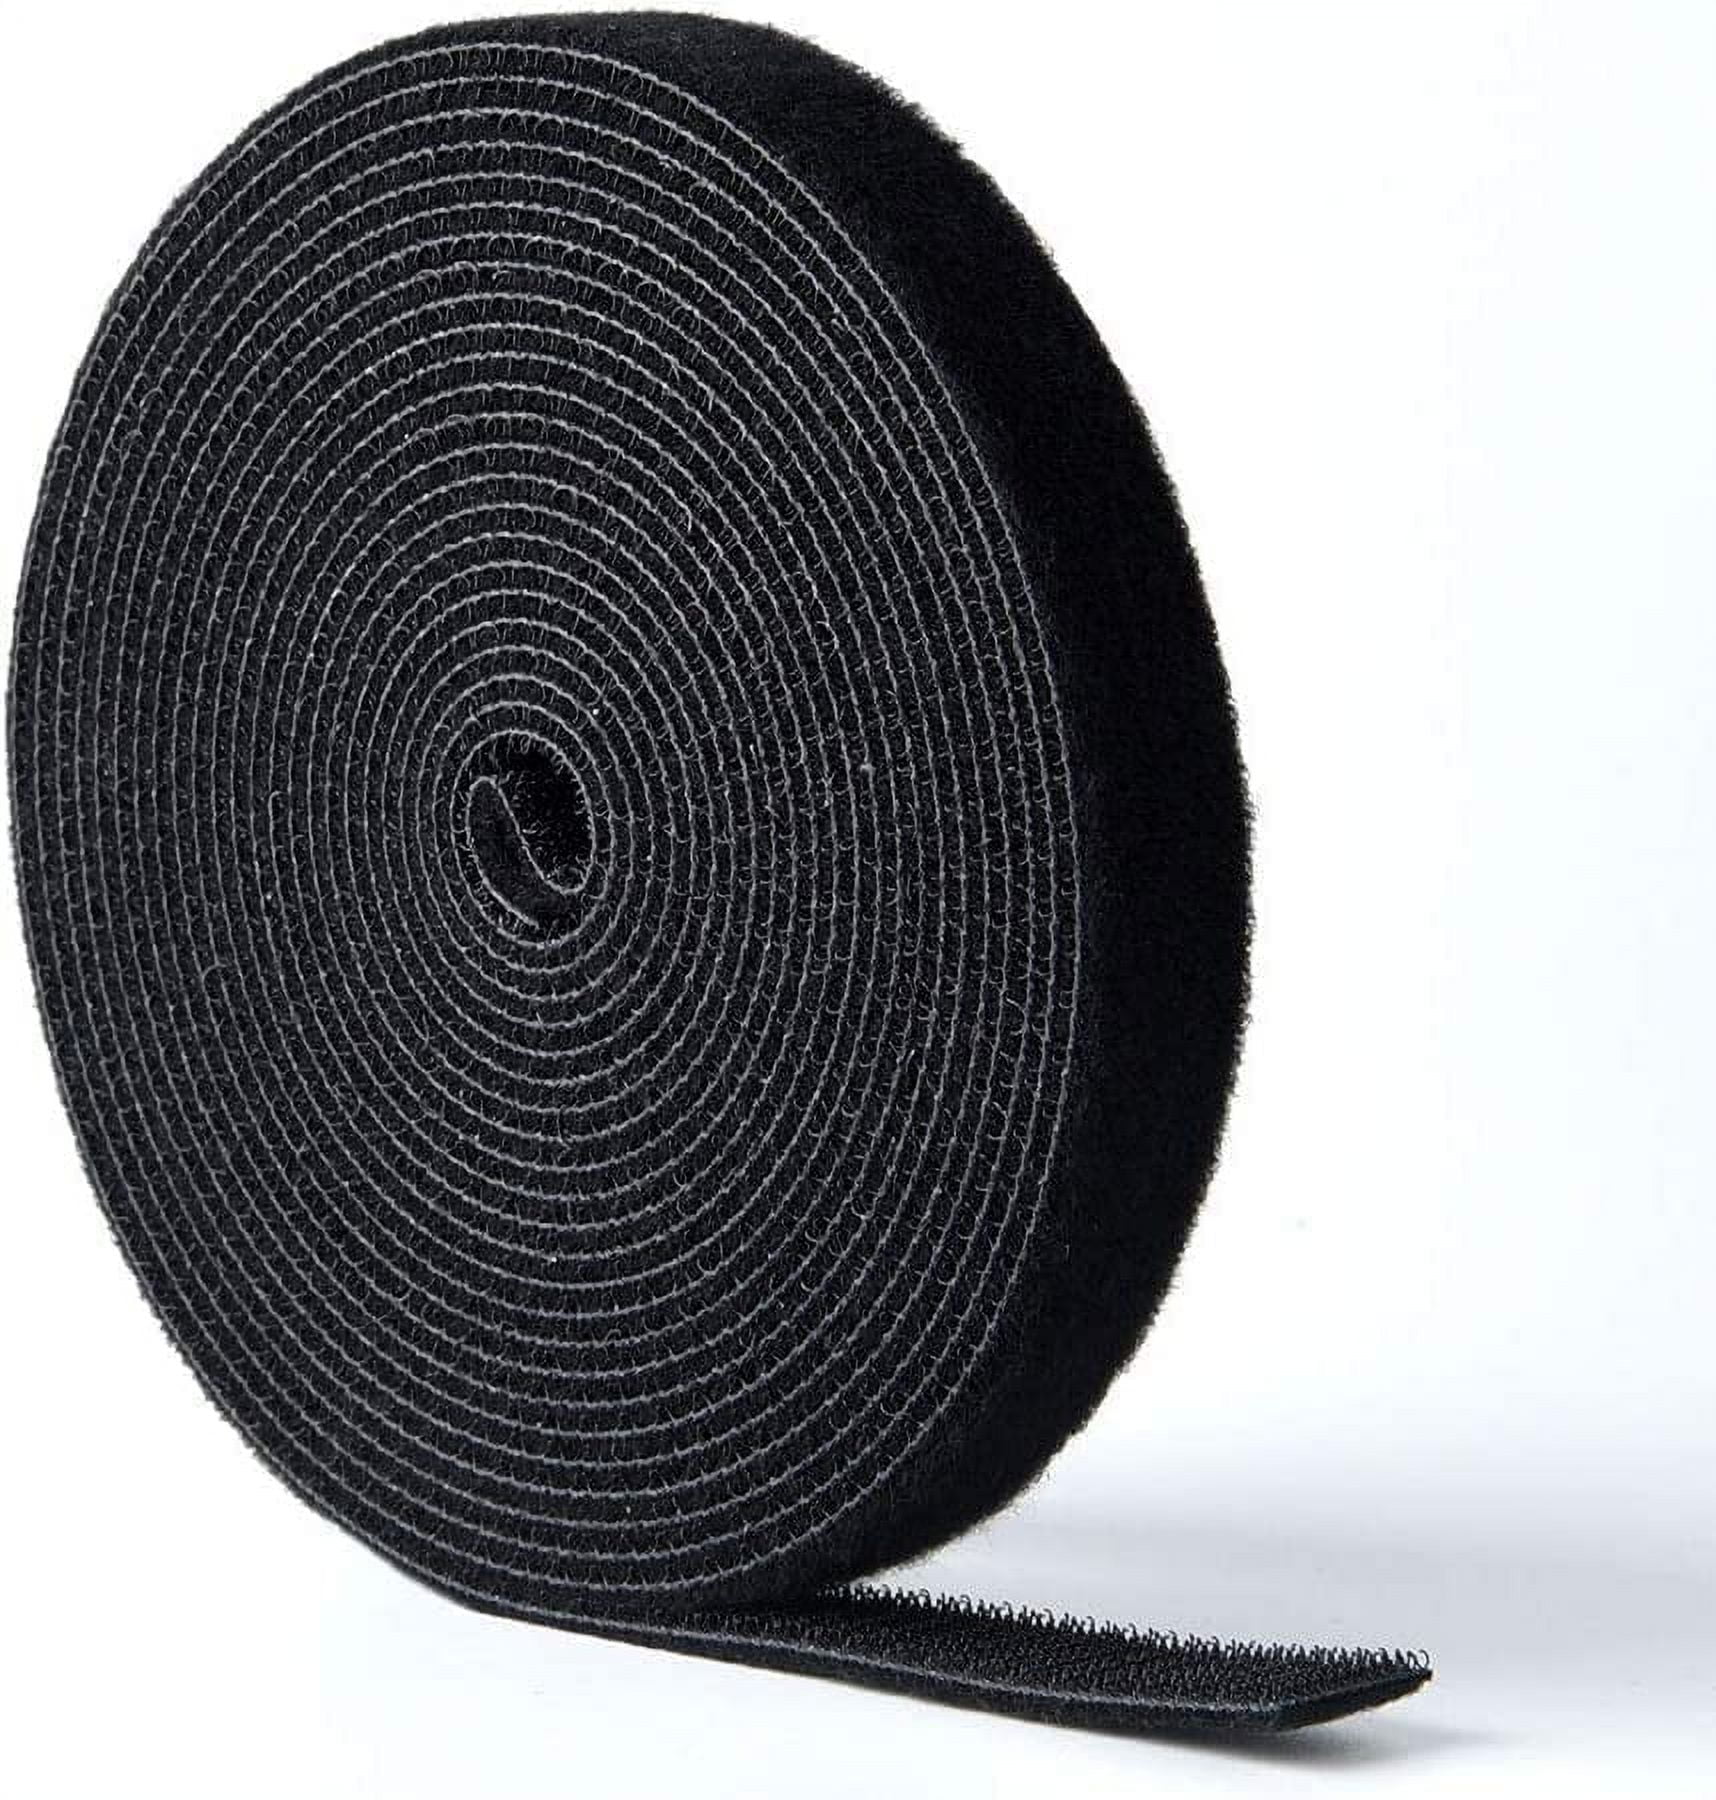 918329-5 Velcro Brand Hook-and-Loop Cable Tie Roll, Cut to Length